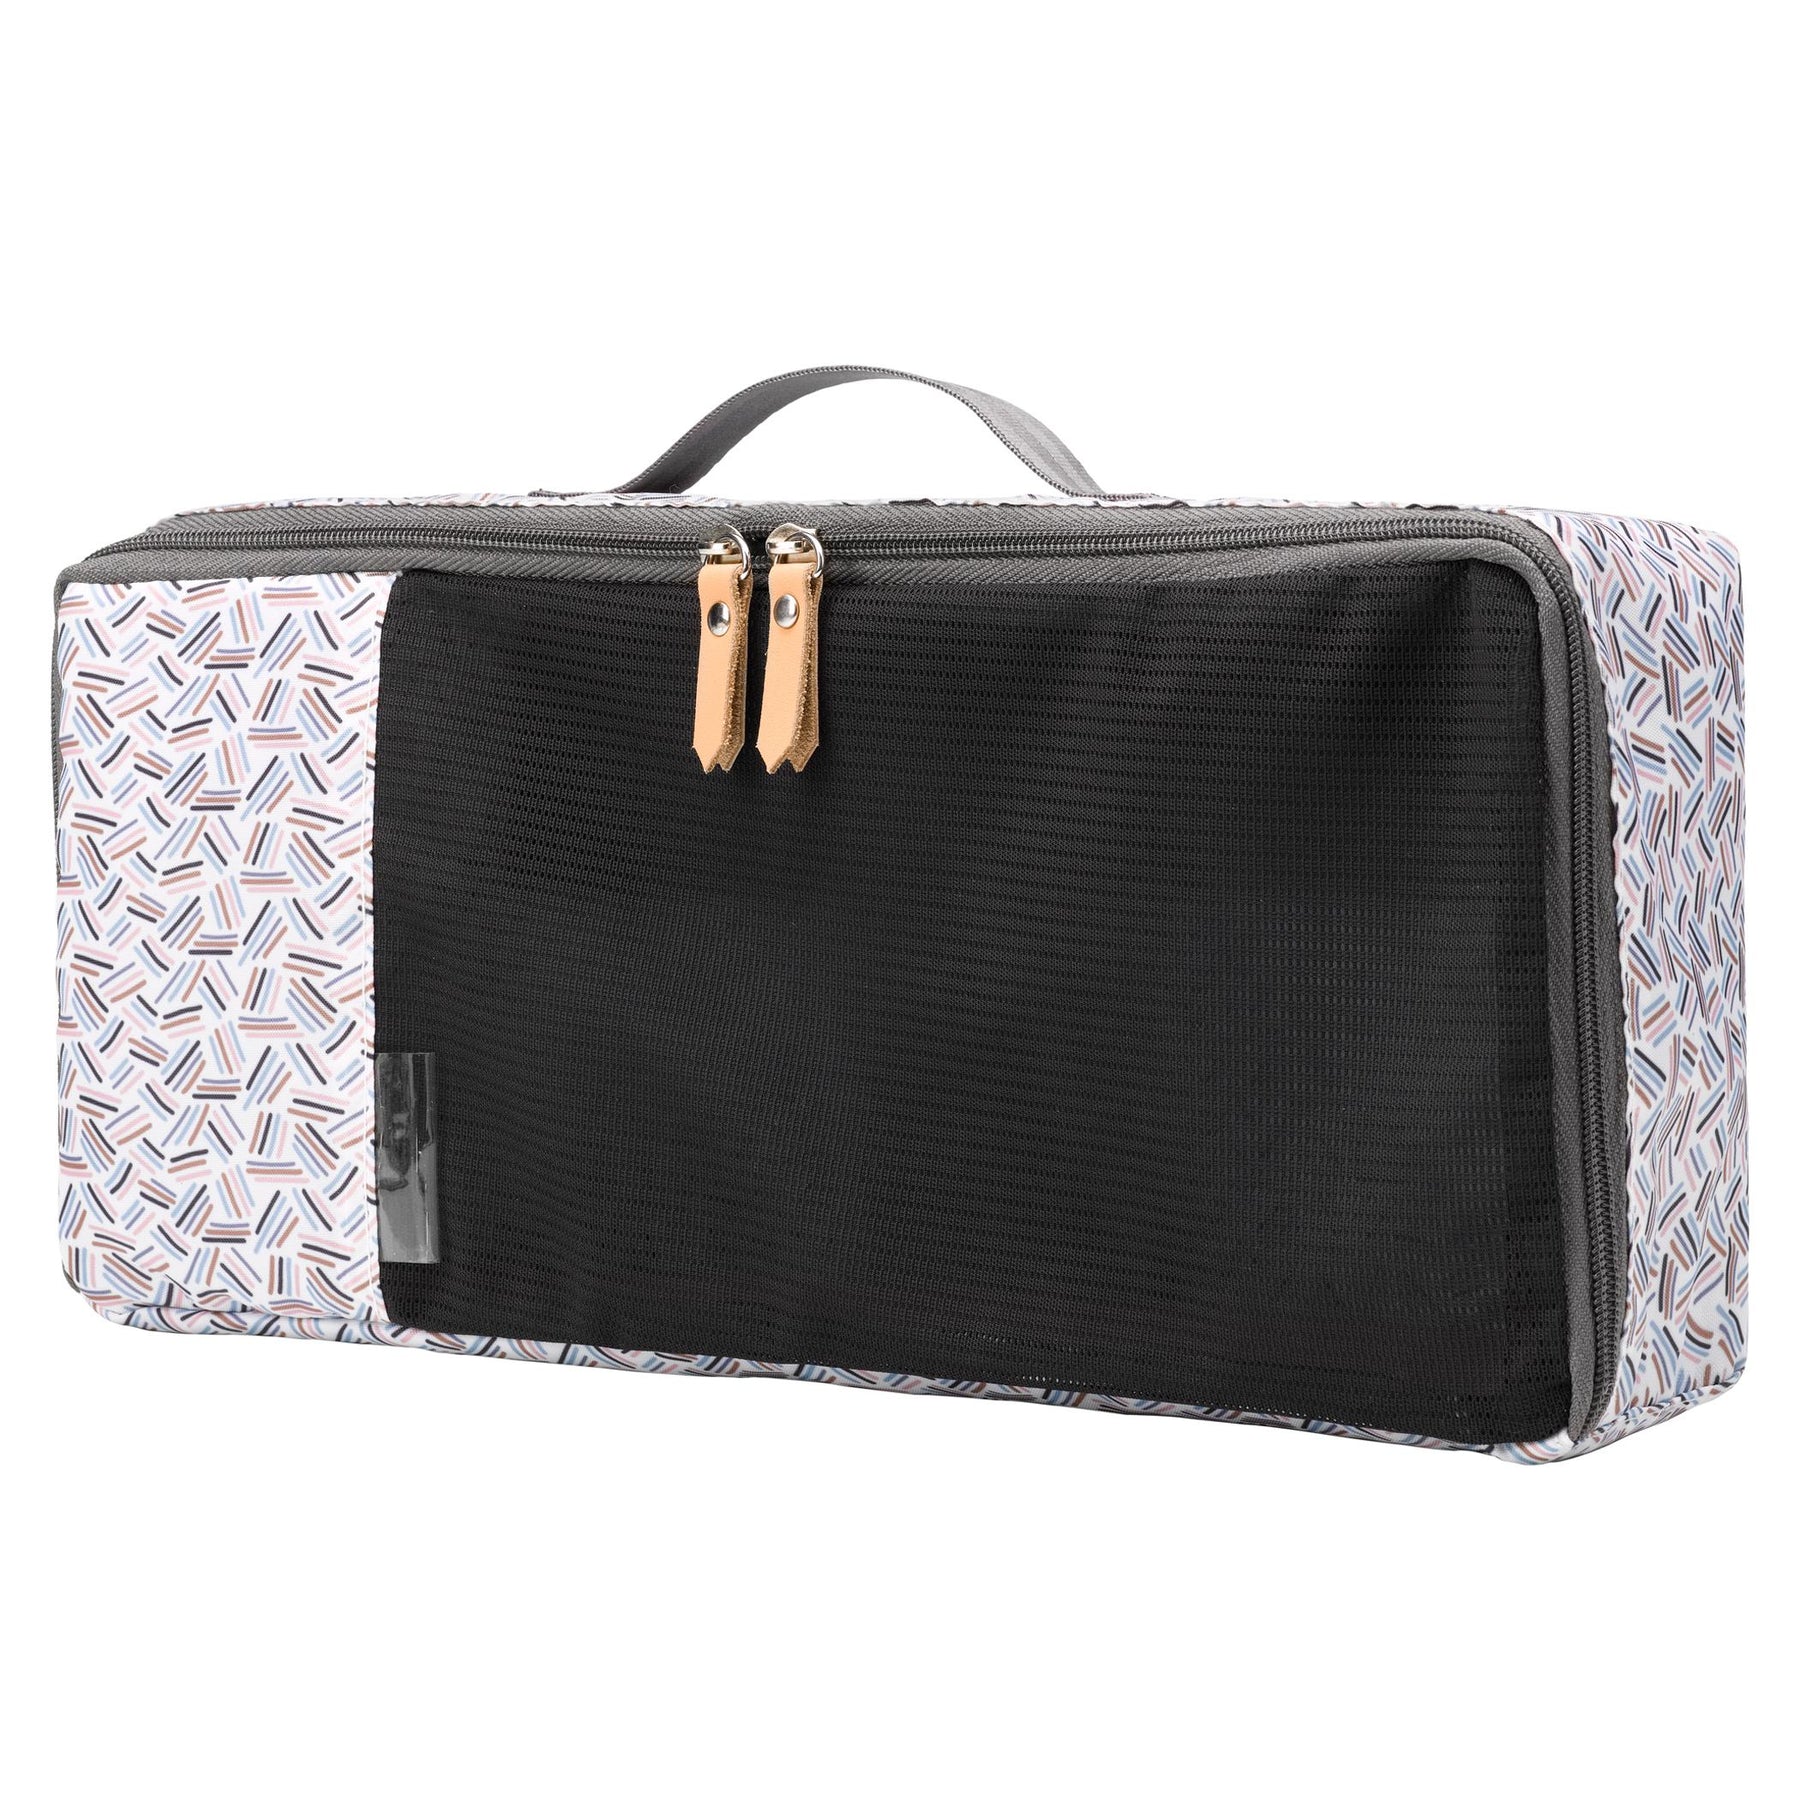 Petunia Pickle Bottom Max Pixel in Stardust Bag - One Size